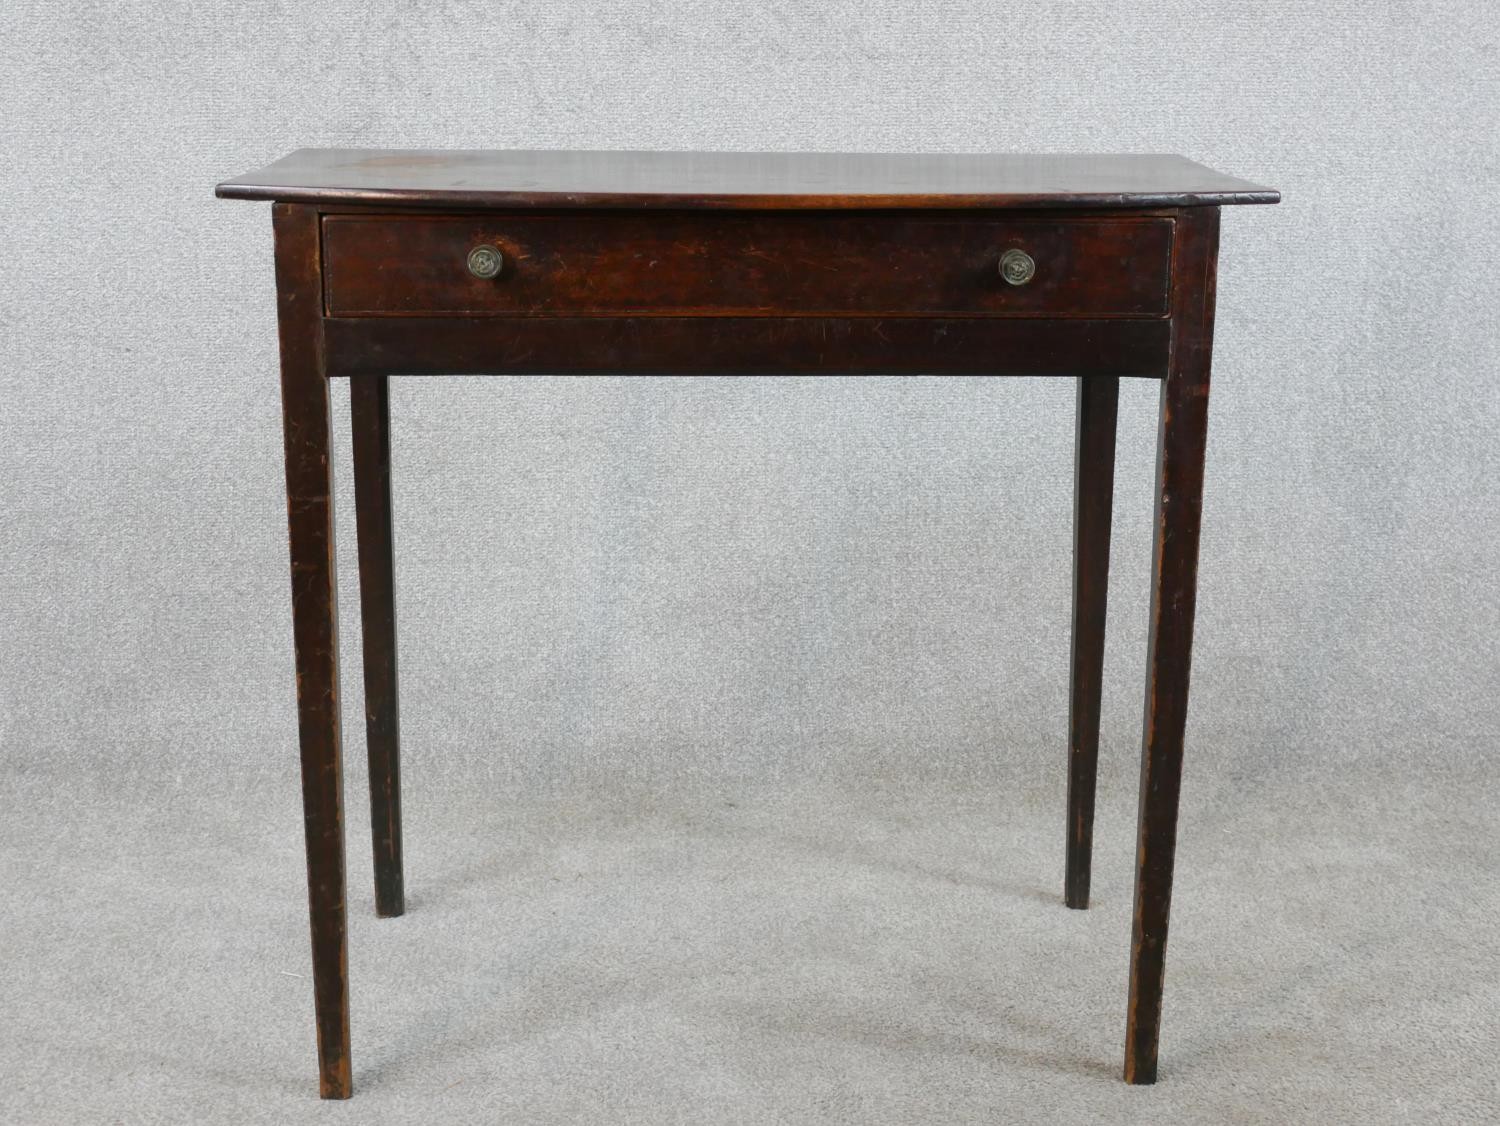 An 18th century mahogany bow fronted side table, with single long drawer on square tapering legs.